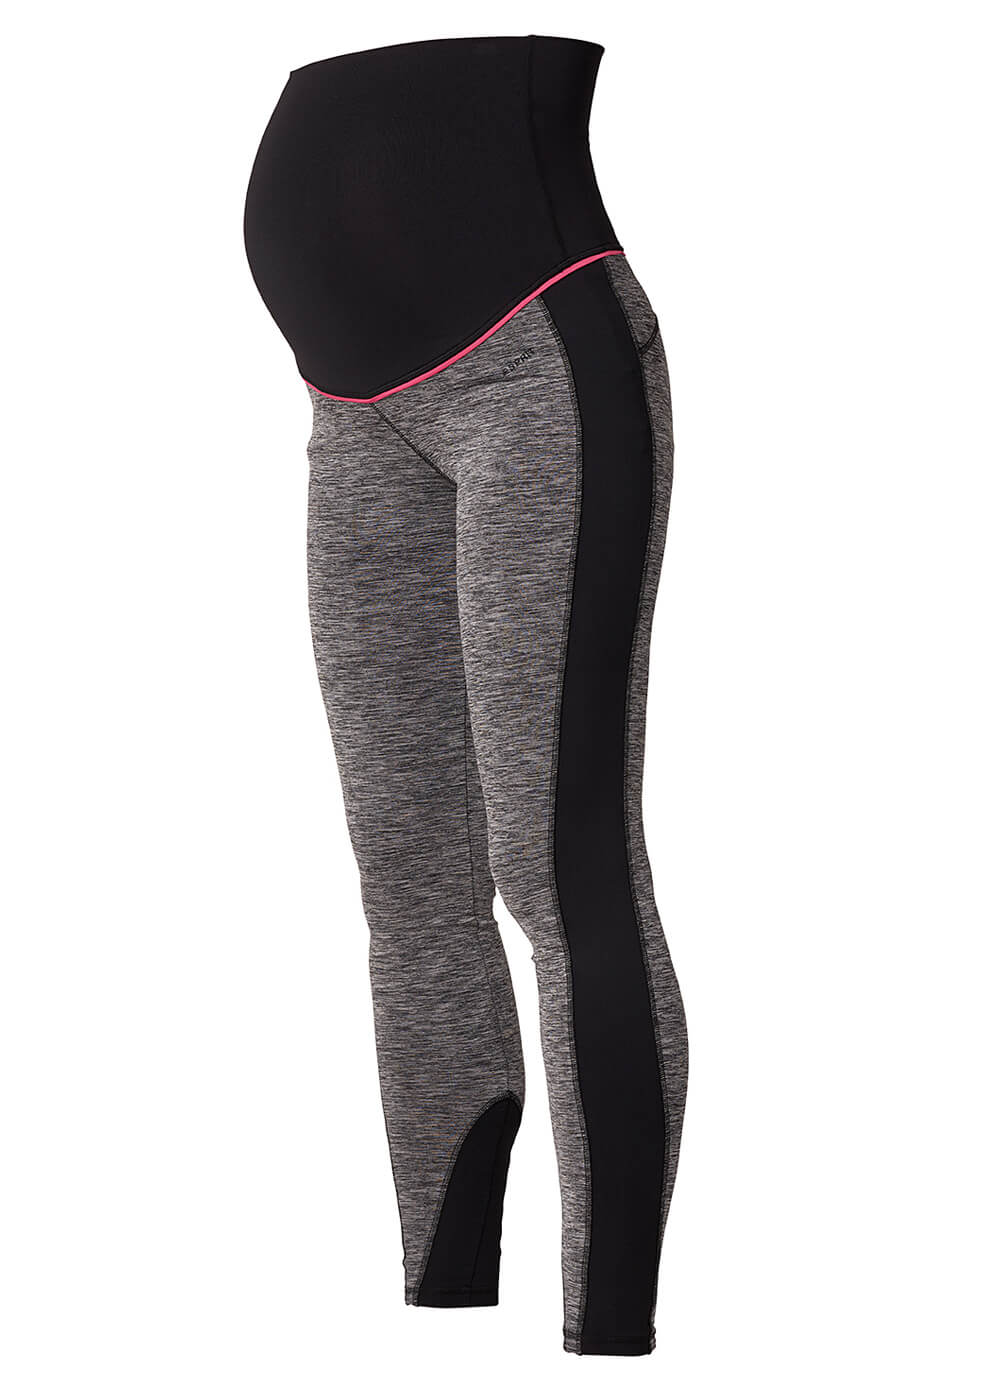 Maternity Active Sports Leggings in Black Marle by Esprit